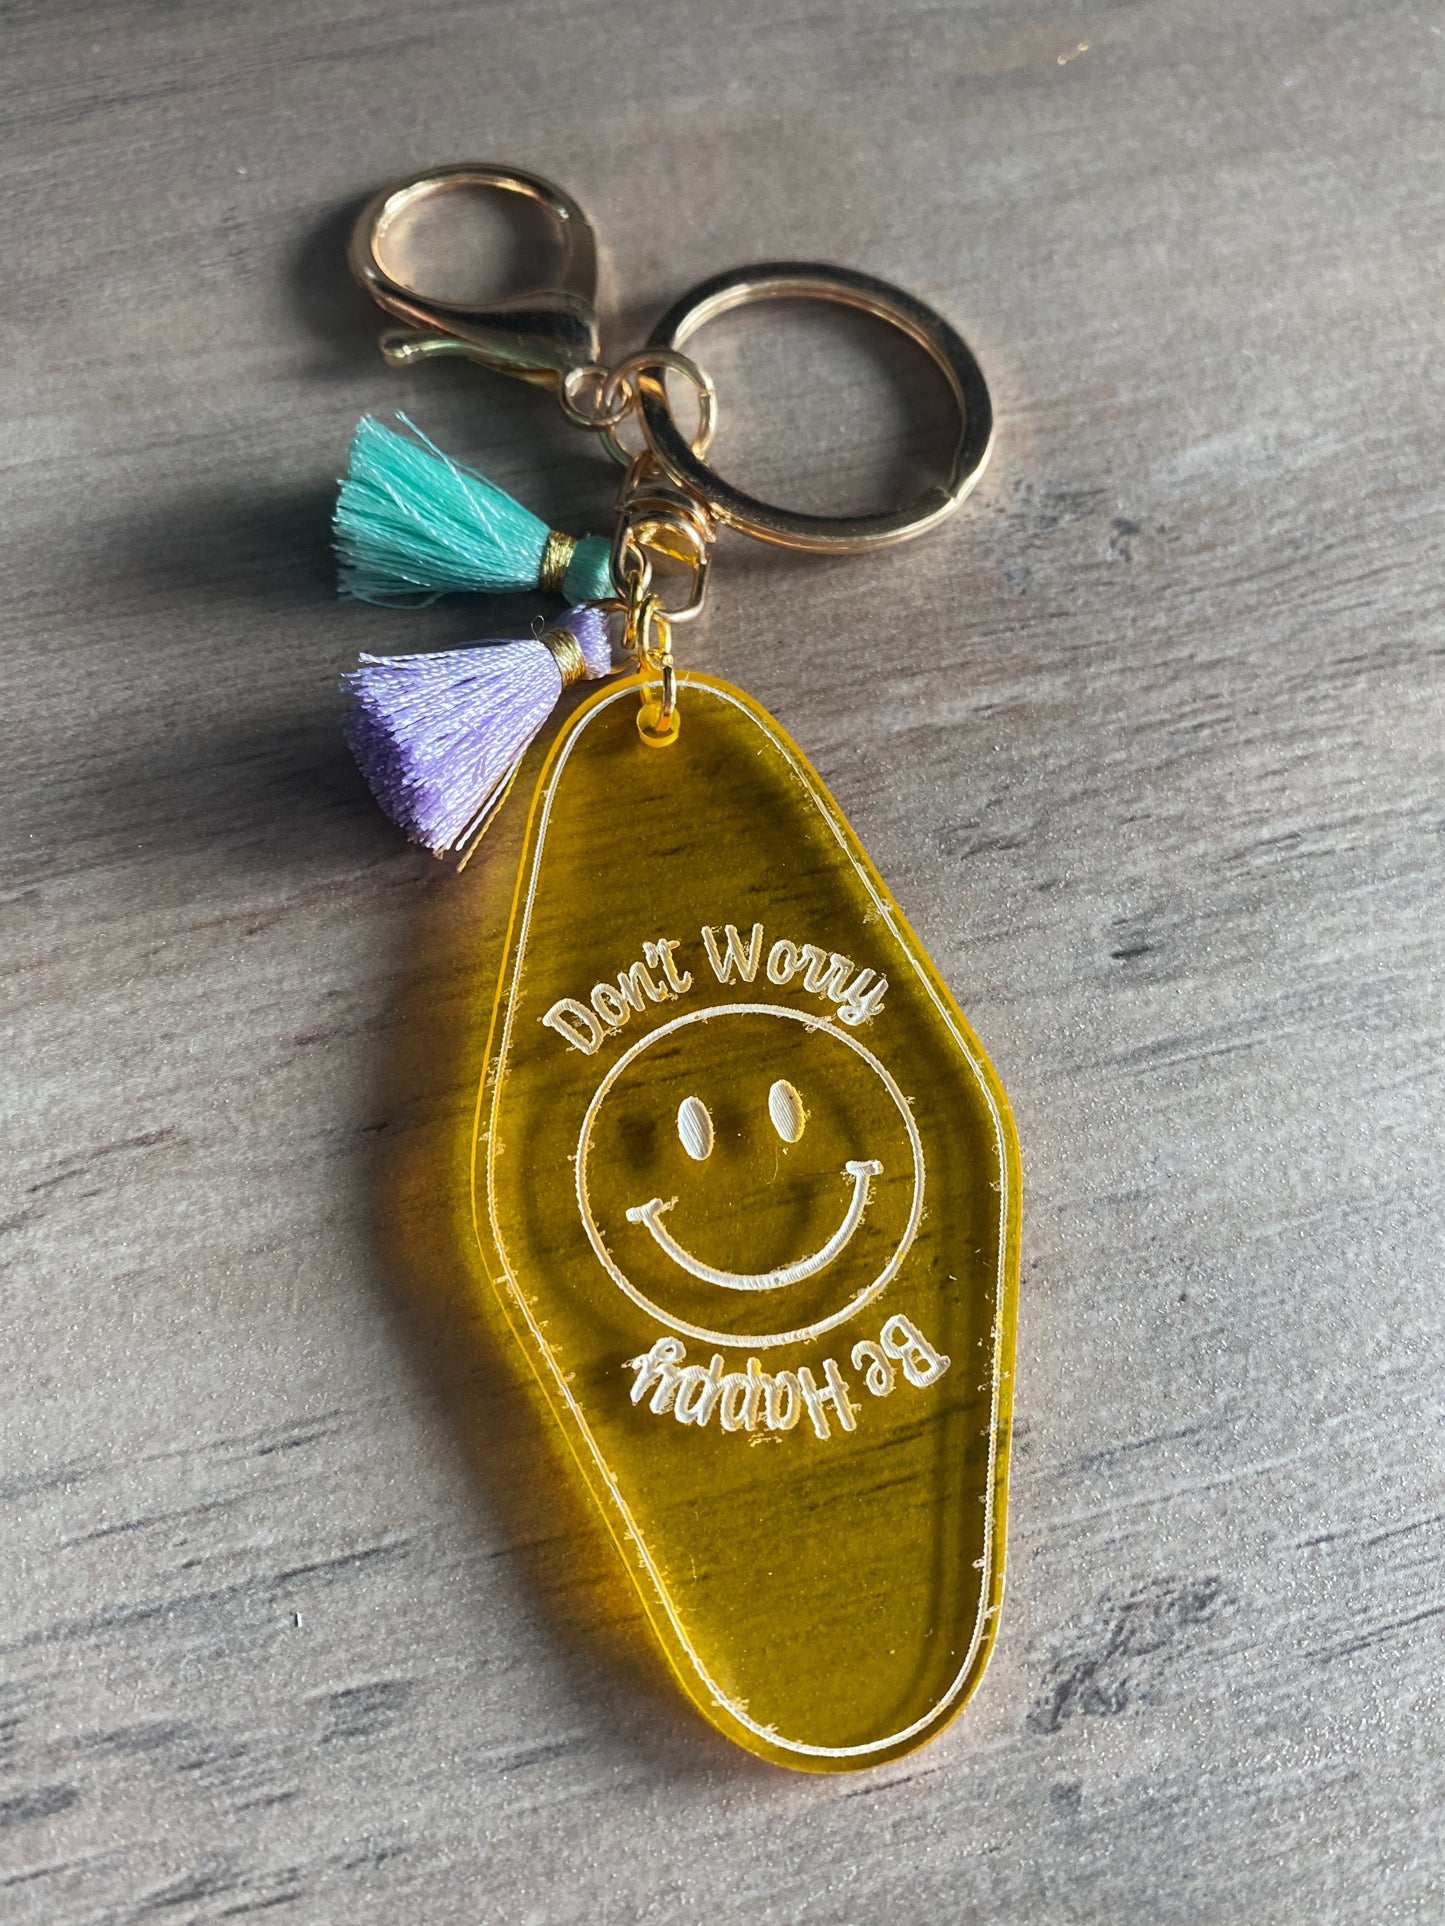 Don't Worry, Be Happy - Vintage Style Acrylic Keychain